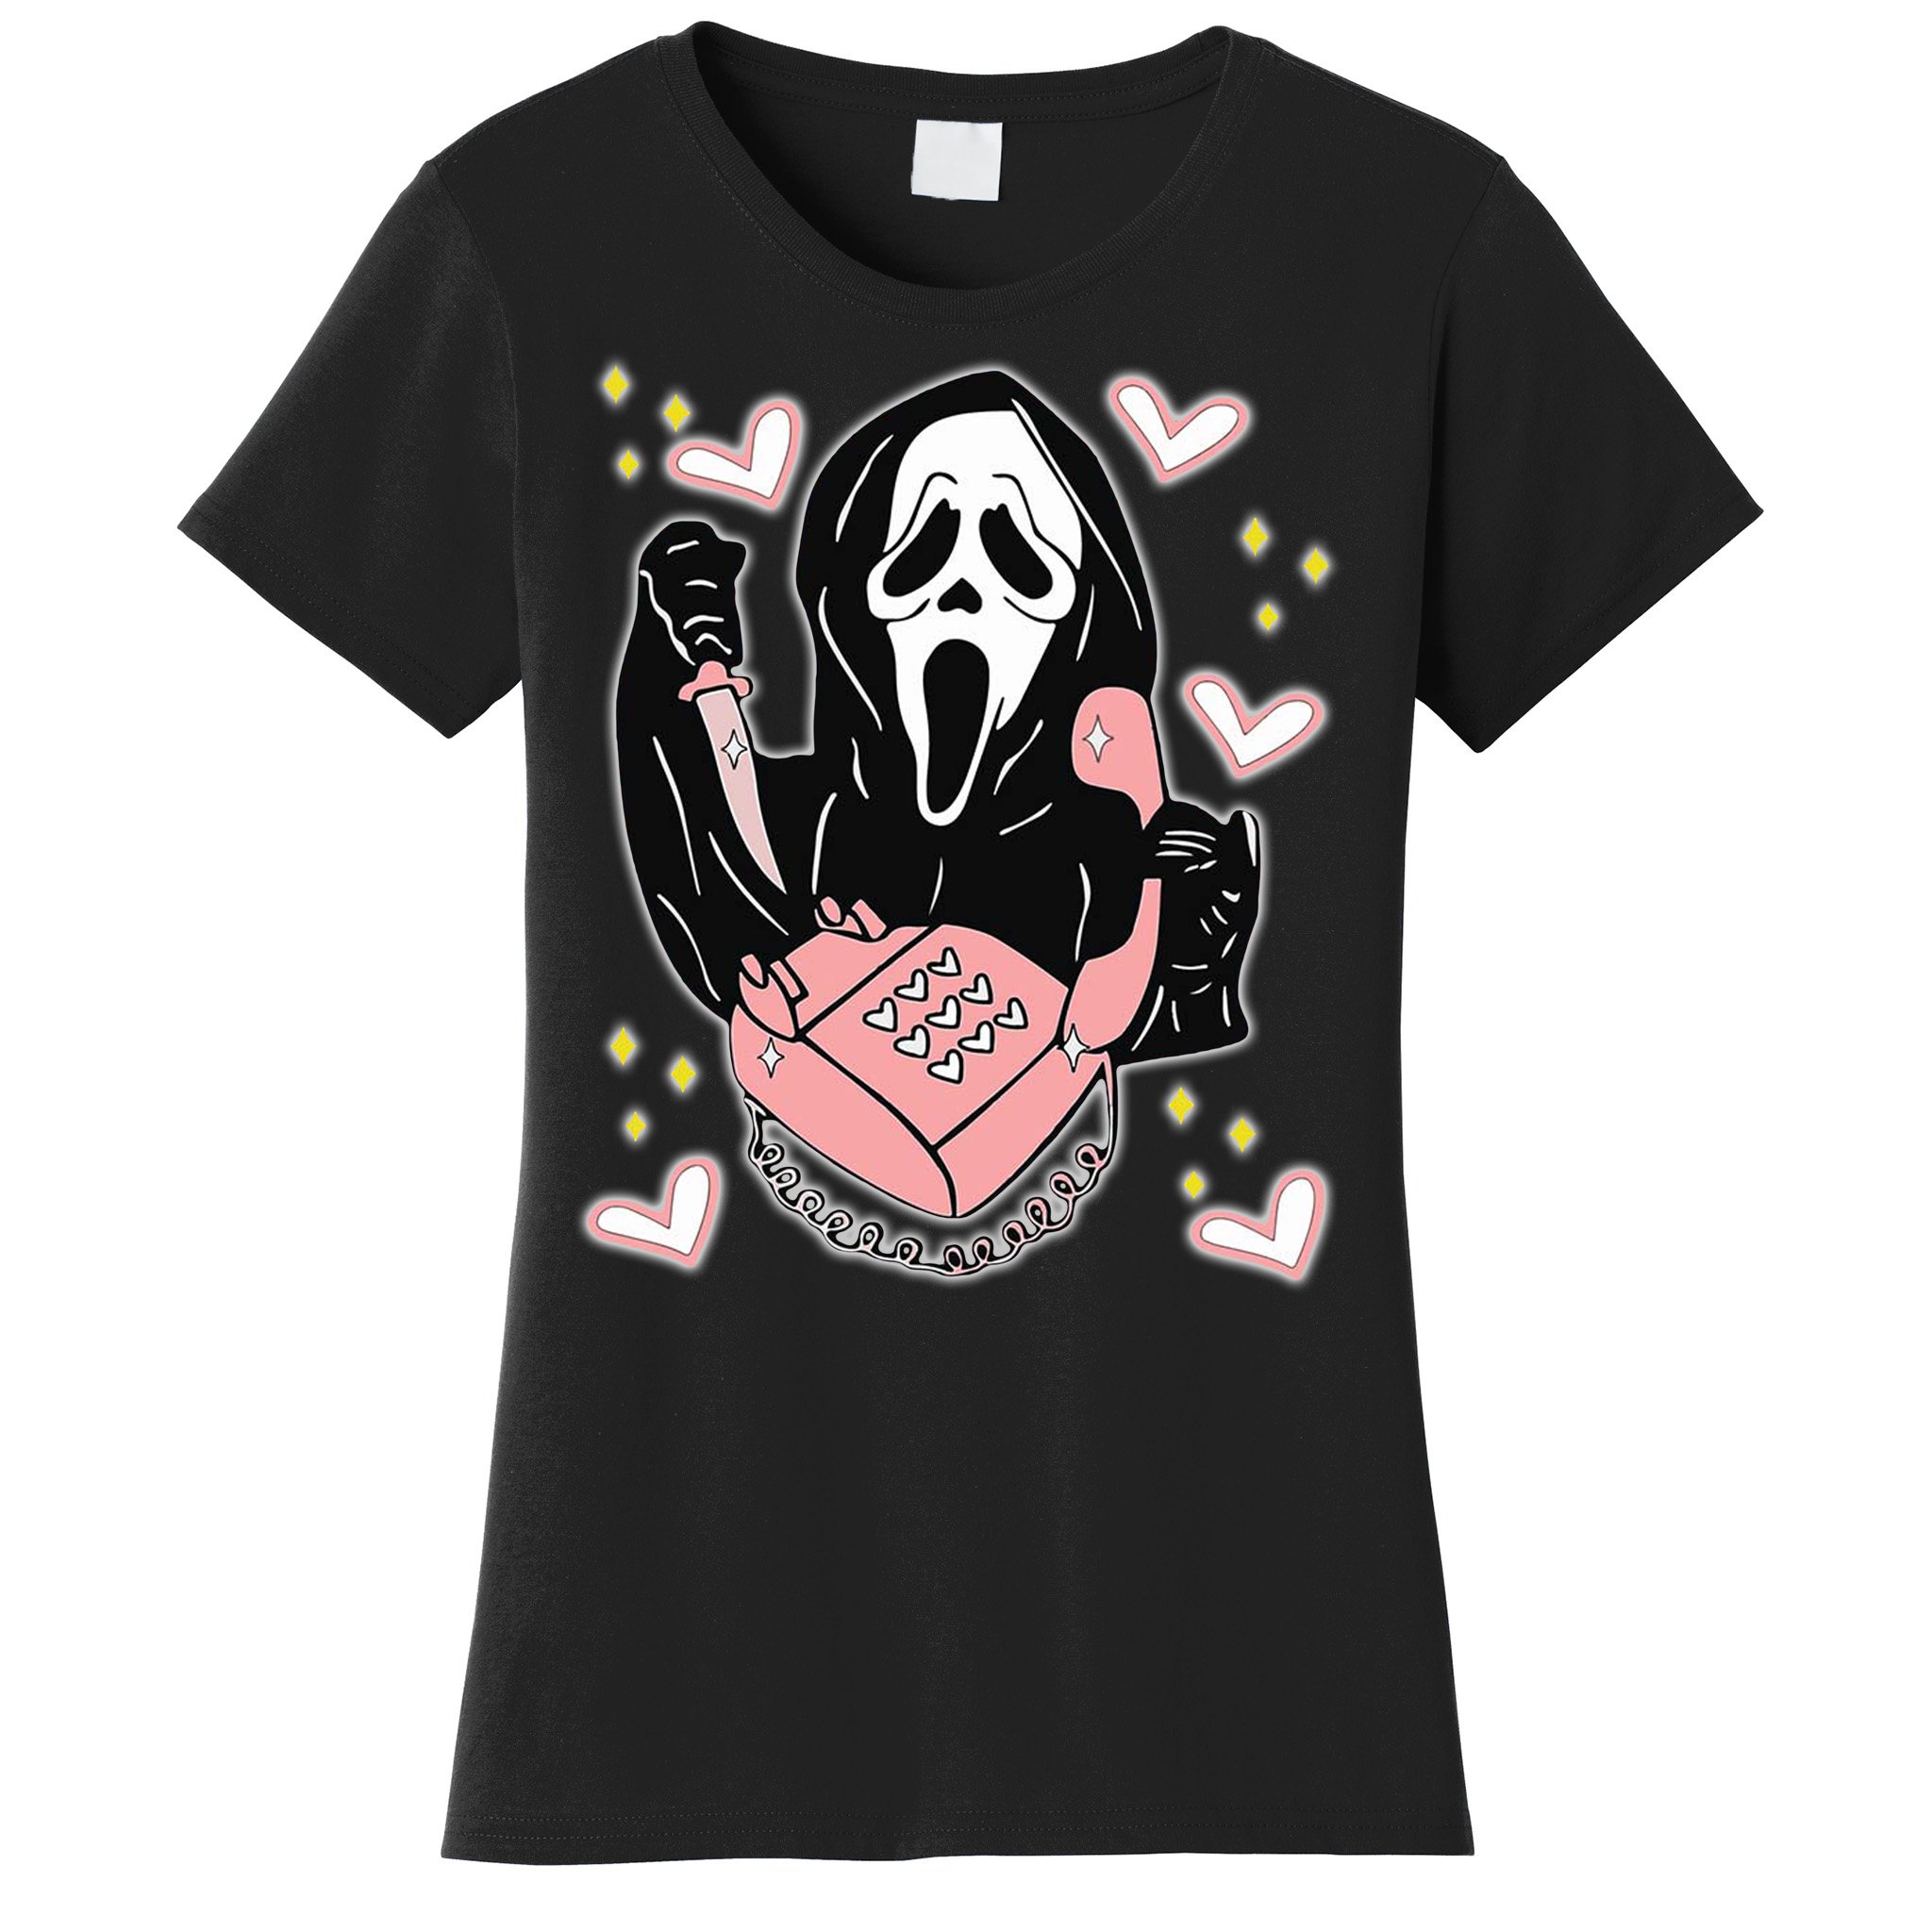 Adult Ghost Face Jersey 